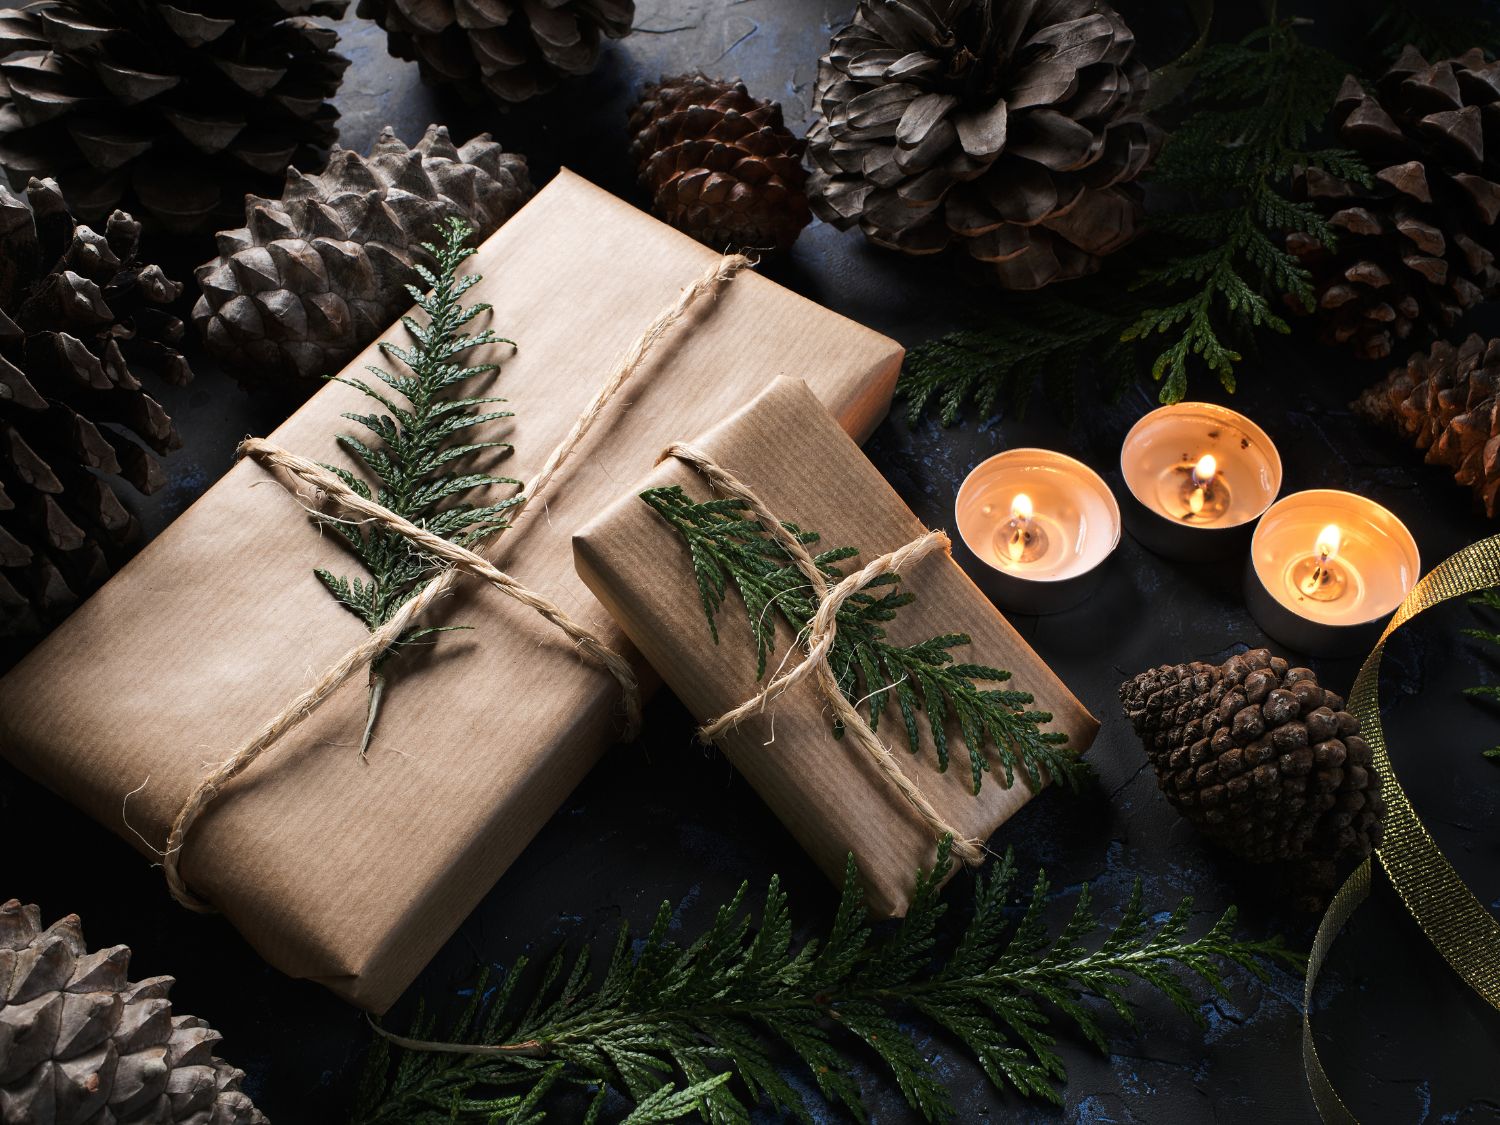 A photo of 2 gifts wrapped in brown paper with pine needles. Candles in the background.